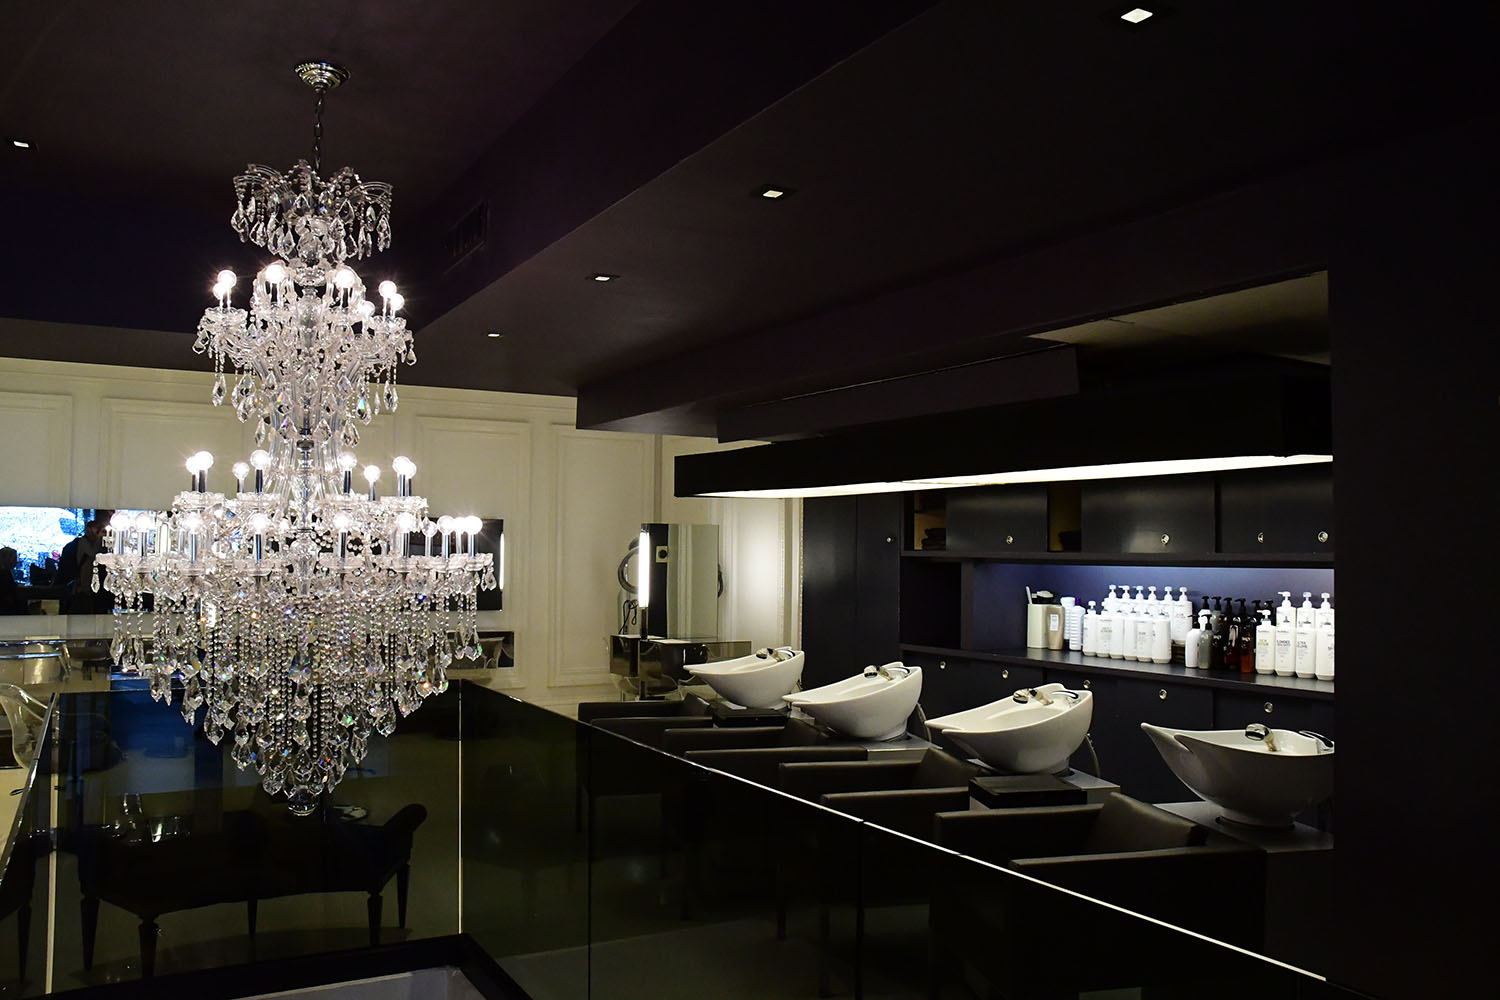 Dimly lit salon with chandelier and sinks